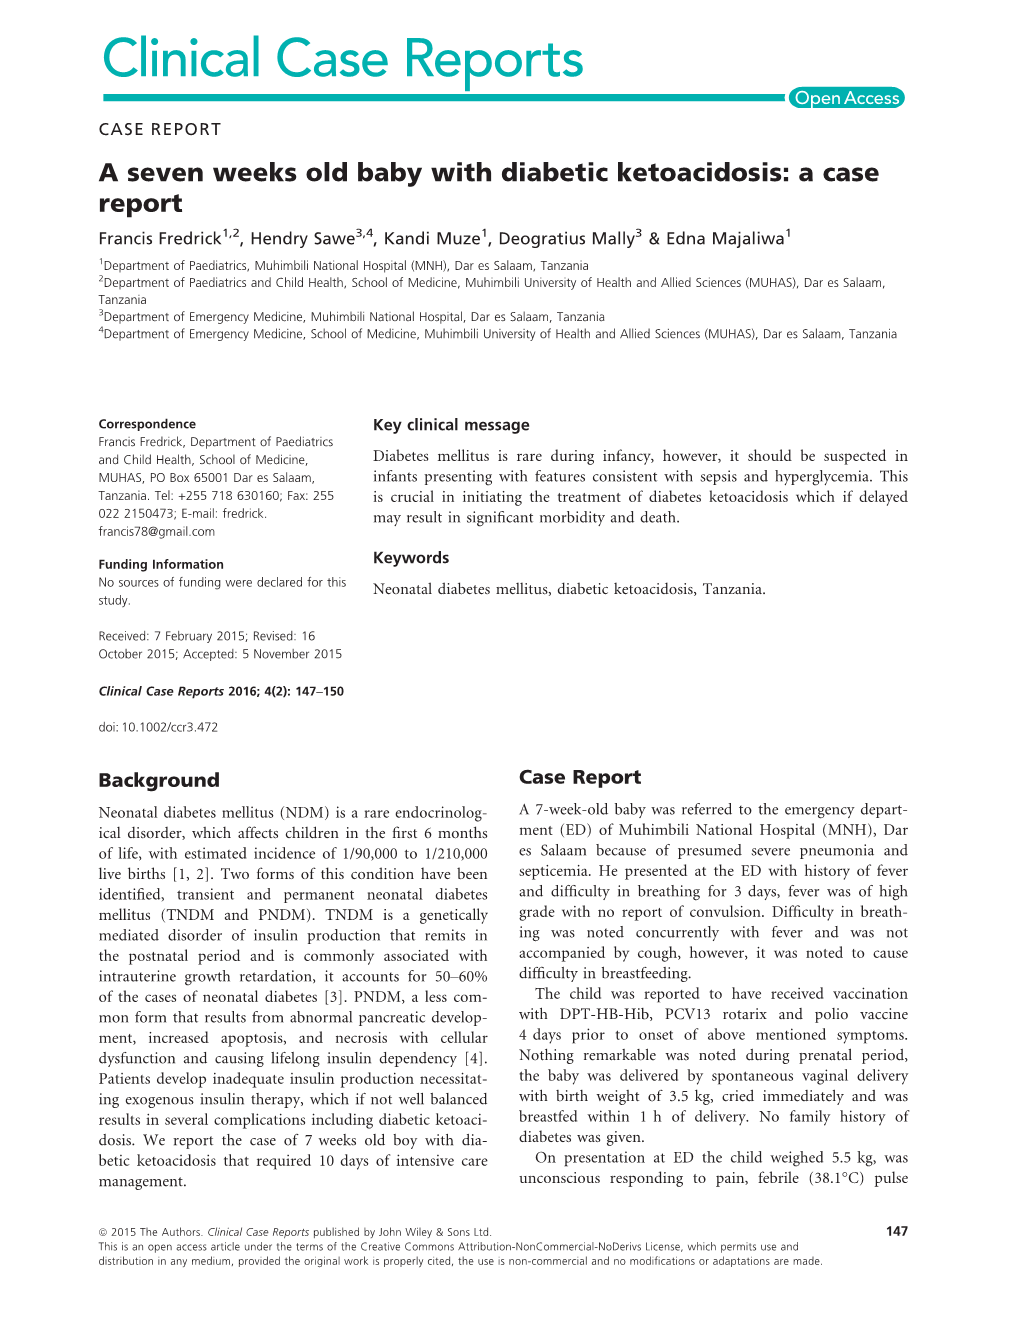 A Seven Weeks Old Baby with Diabetic Ketoacidosis